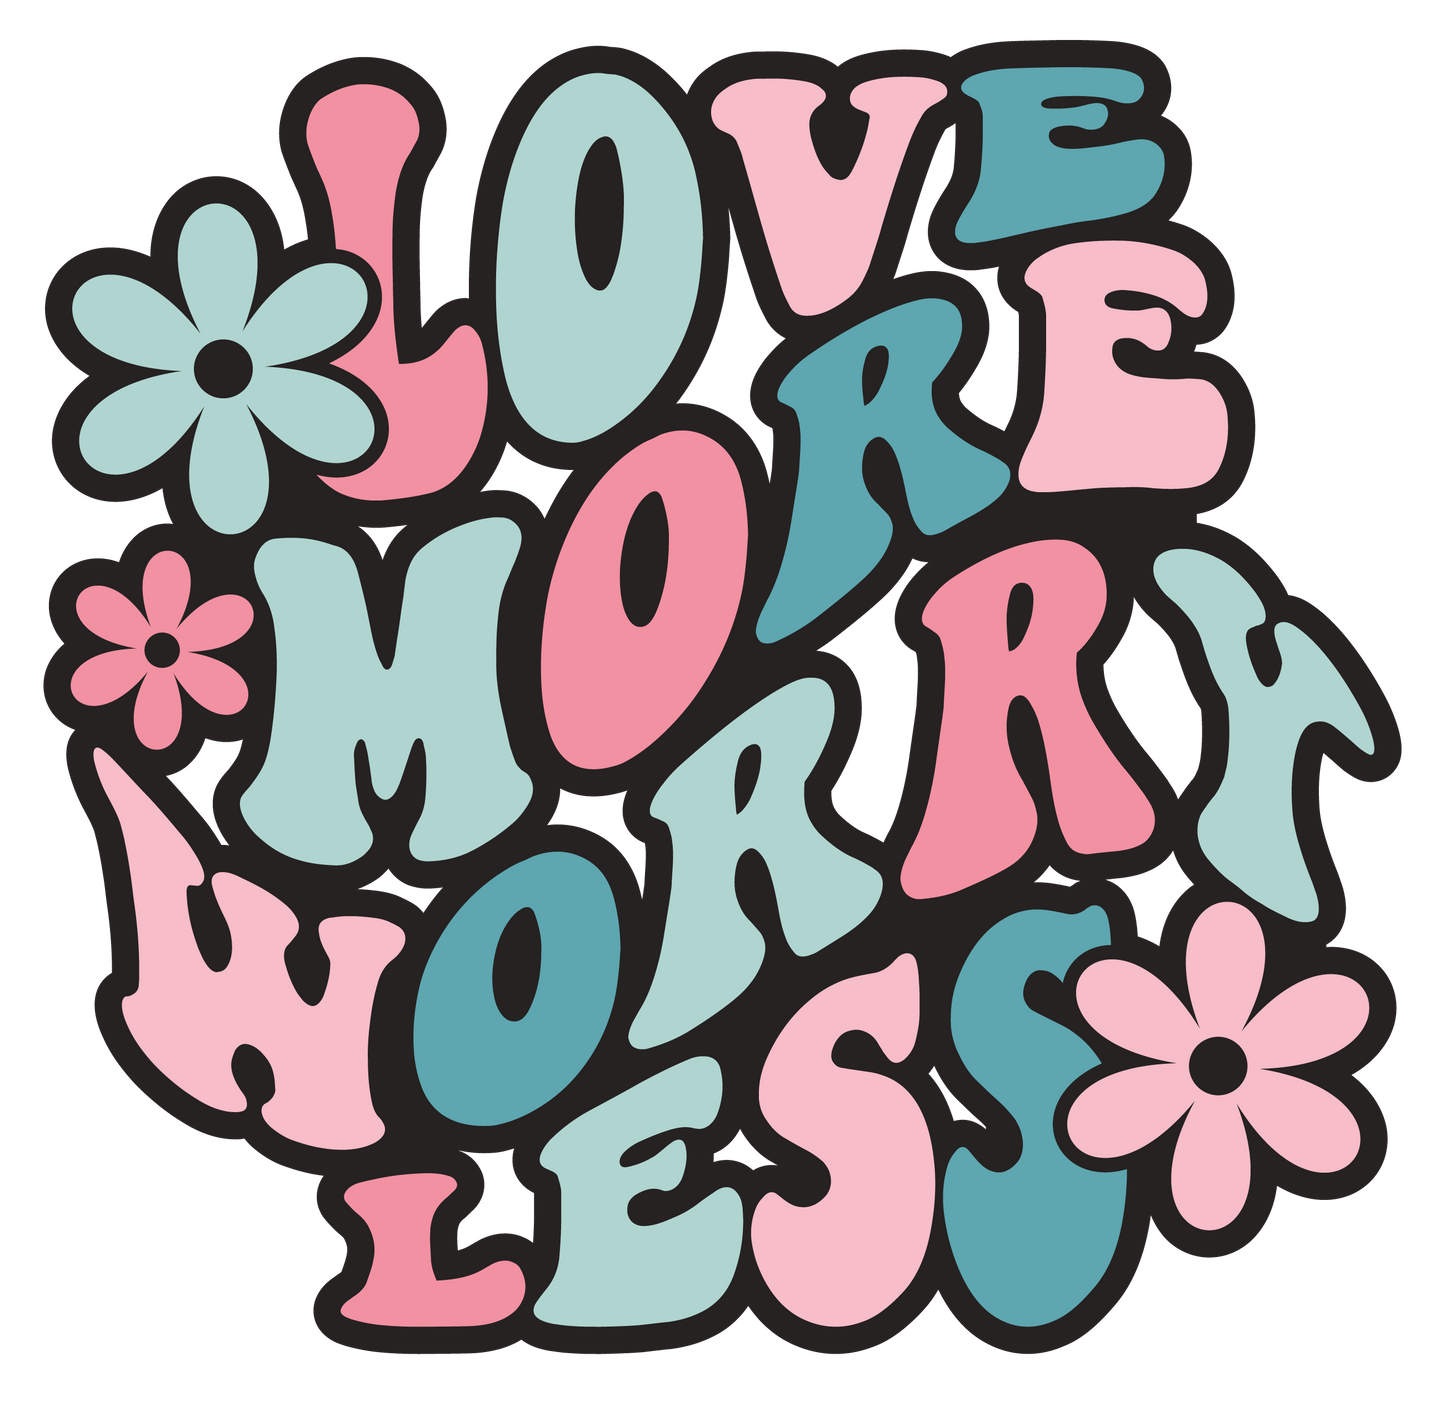 "Love More Worry Less" Transfer